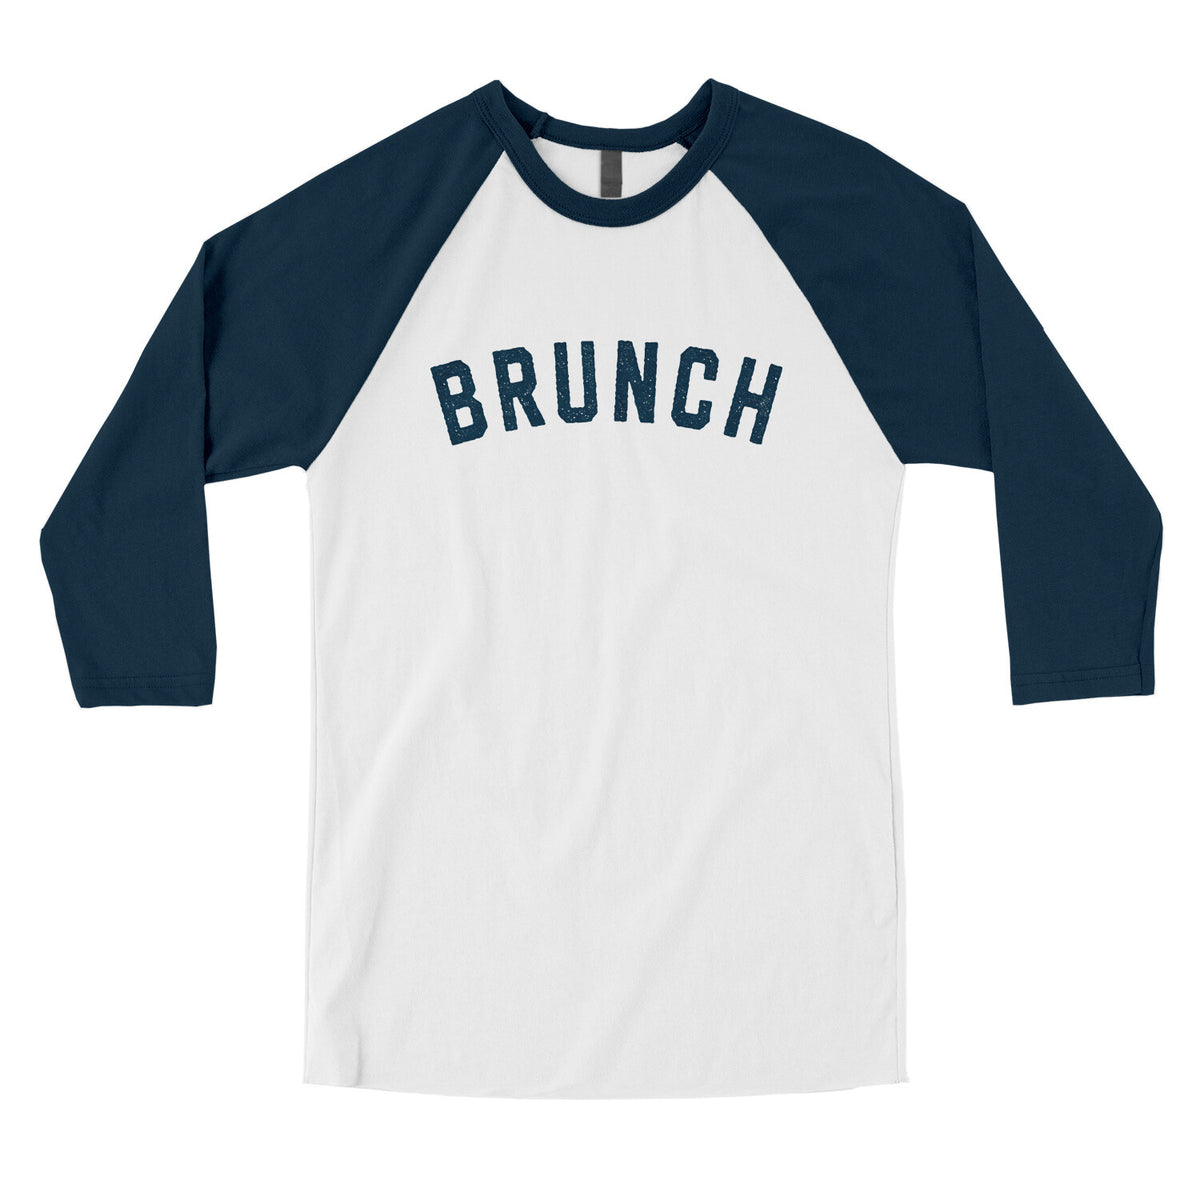 Brunch in White with Navy Color